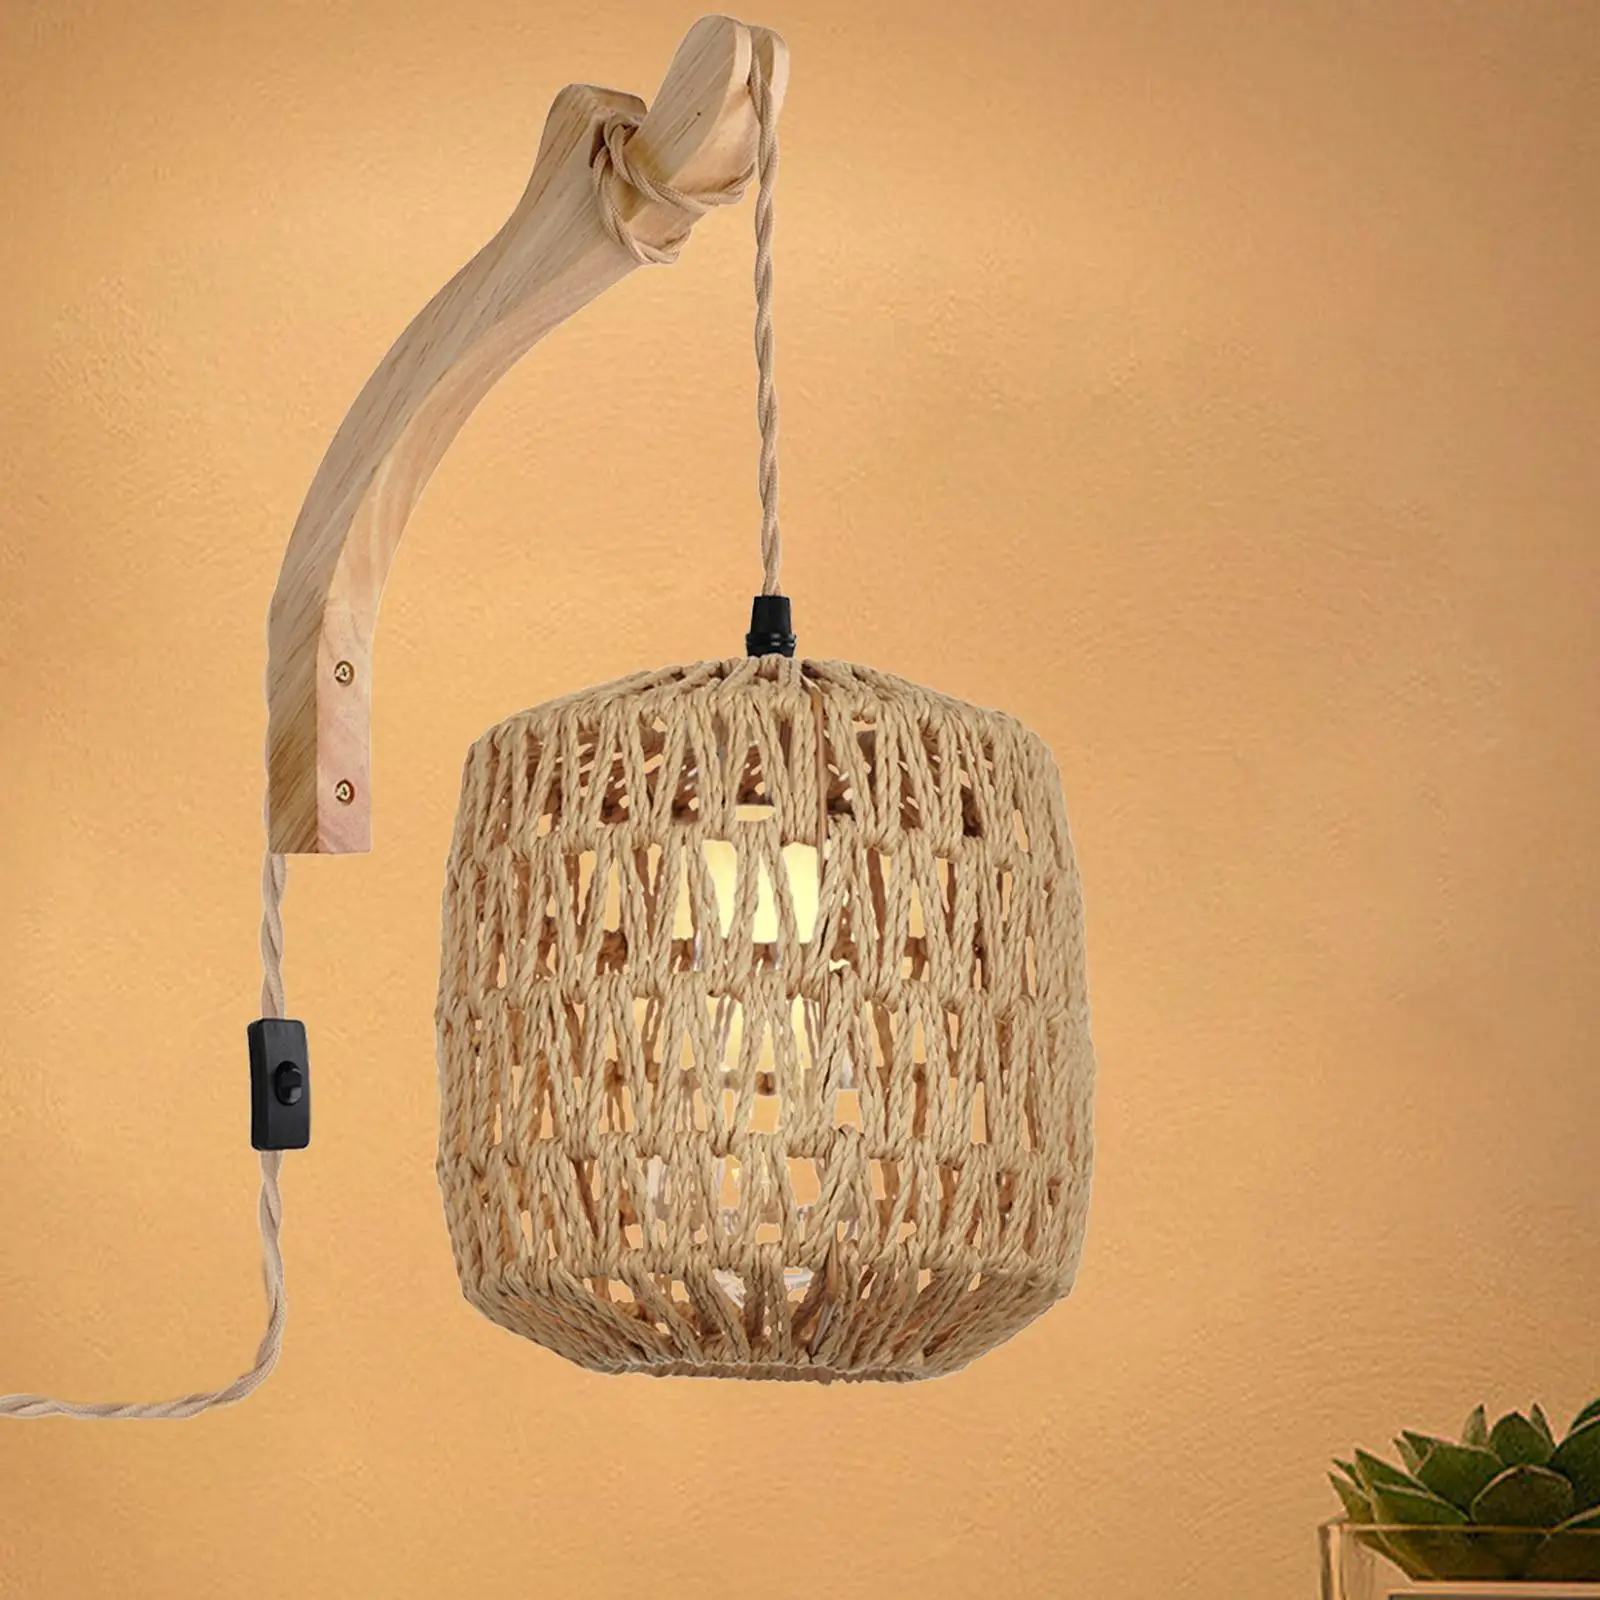 Wall Lamp Handwoven Shade Wall Mounted Light Boho Wall Sconce Wood Bracket Wall Light Fixture for Porch Bedside Indoor Bedroom